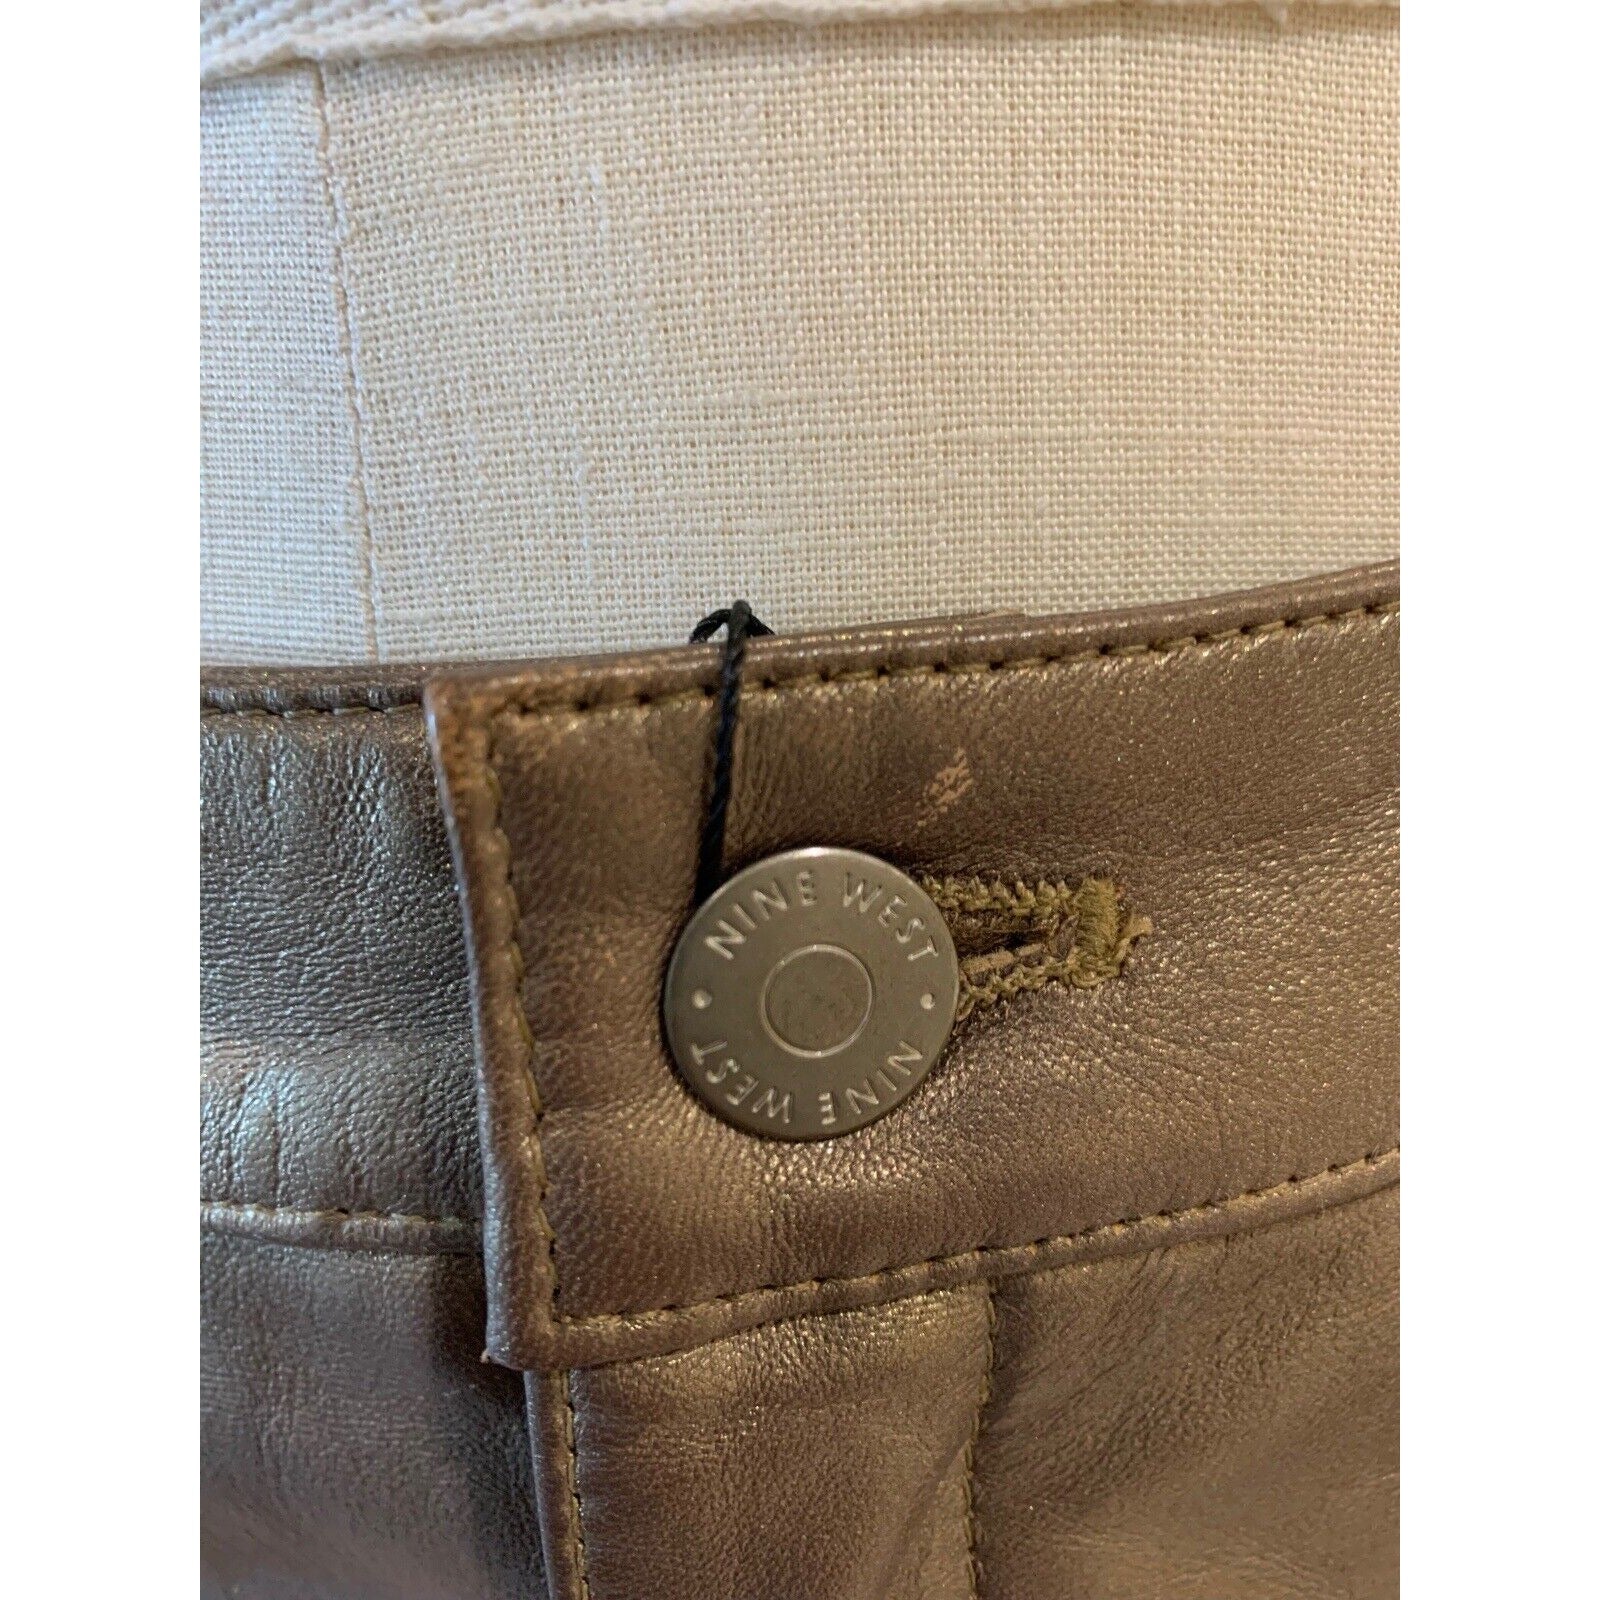 Closeup Of Button With Product Brand